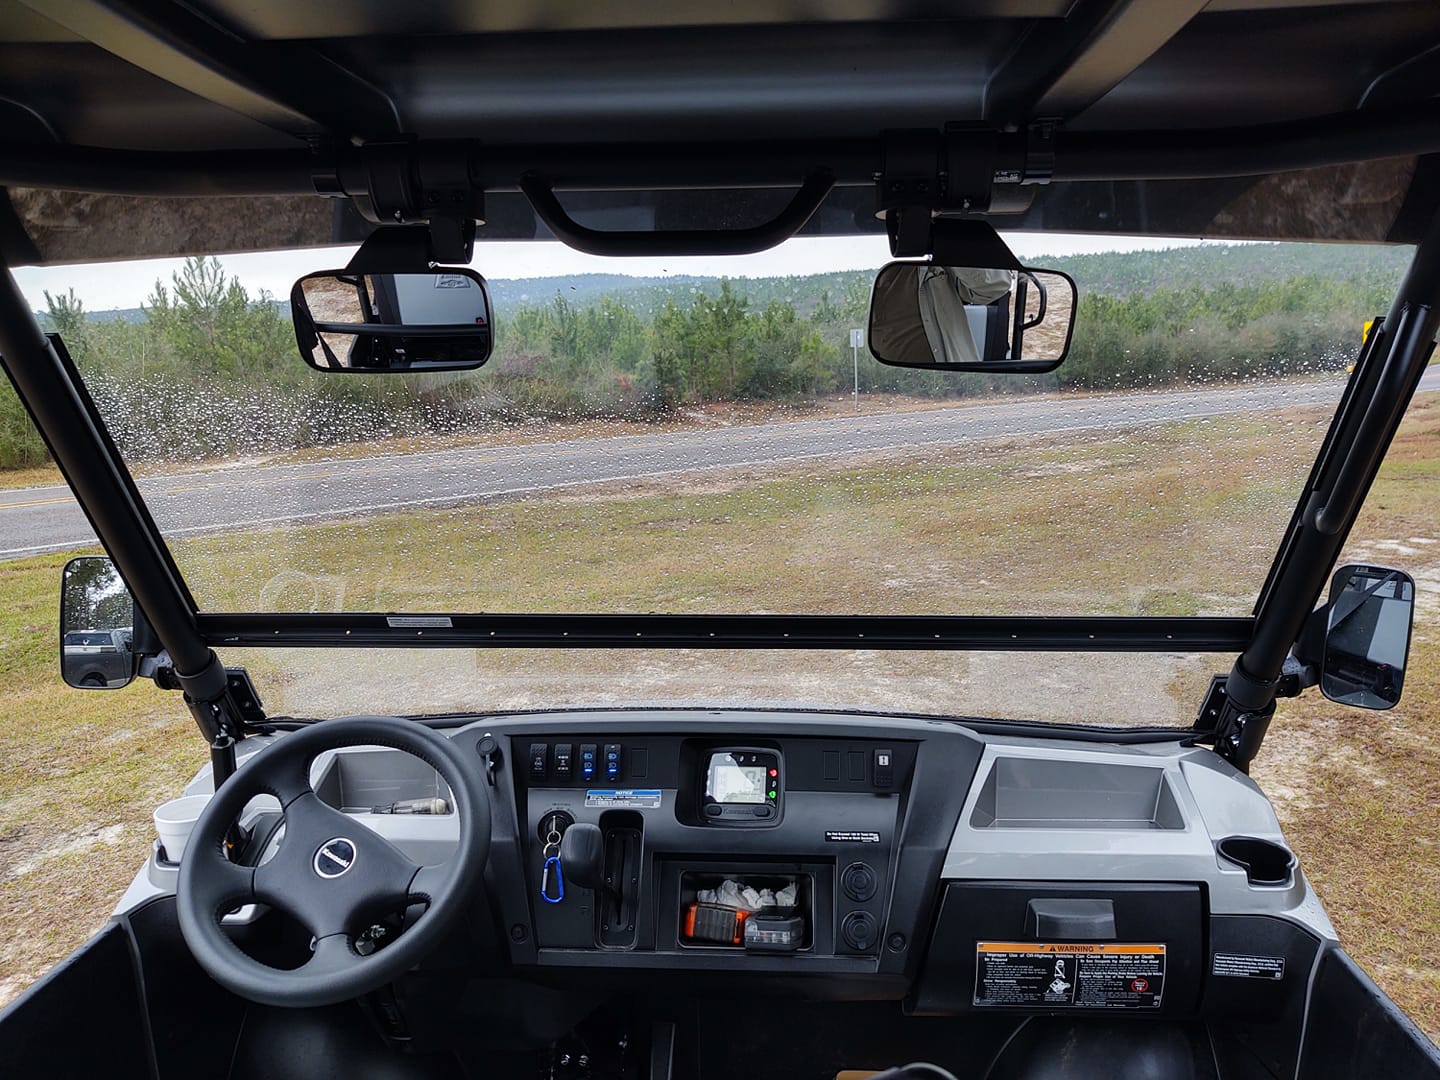 Best Rear View Mirrors For The Kawasaki Mule And Teryx